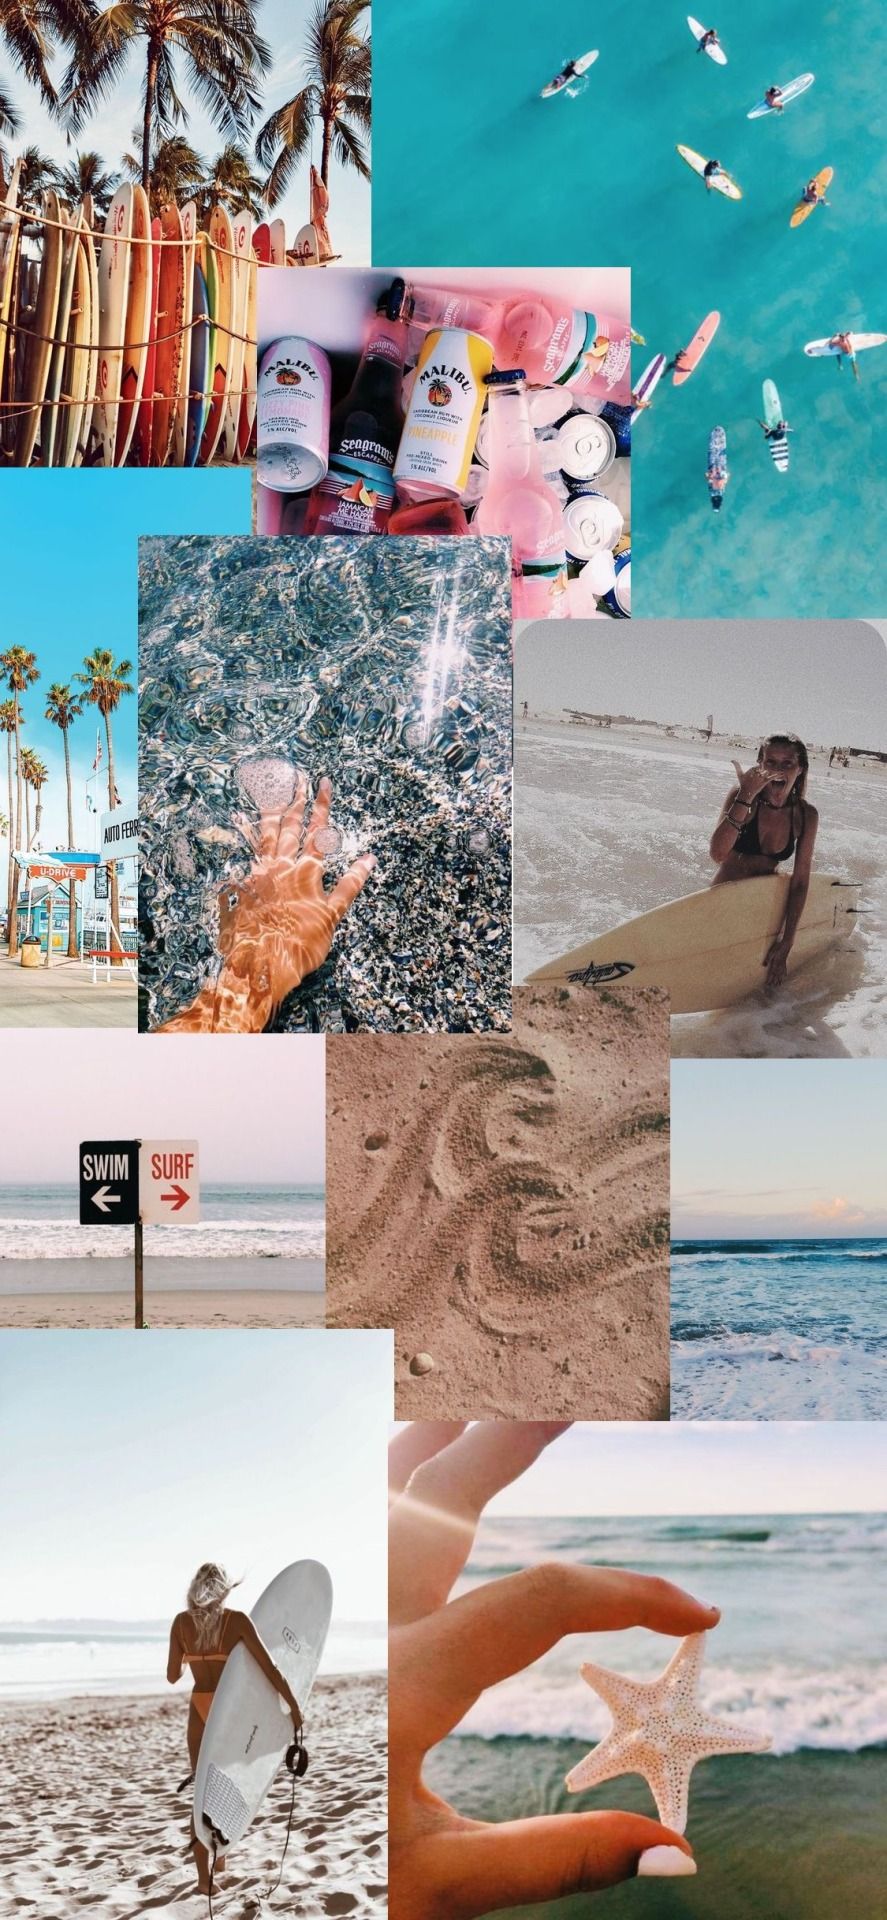 A collage of pictures with surfers and palm trees - Beach